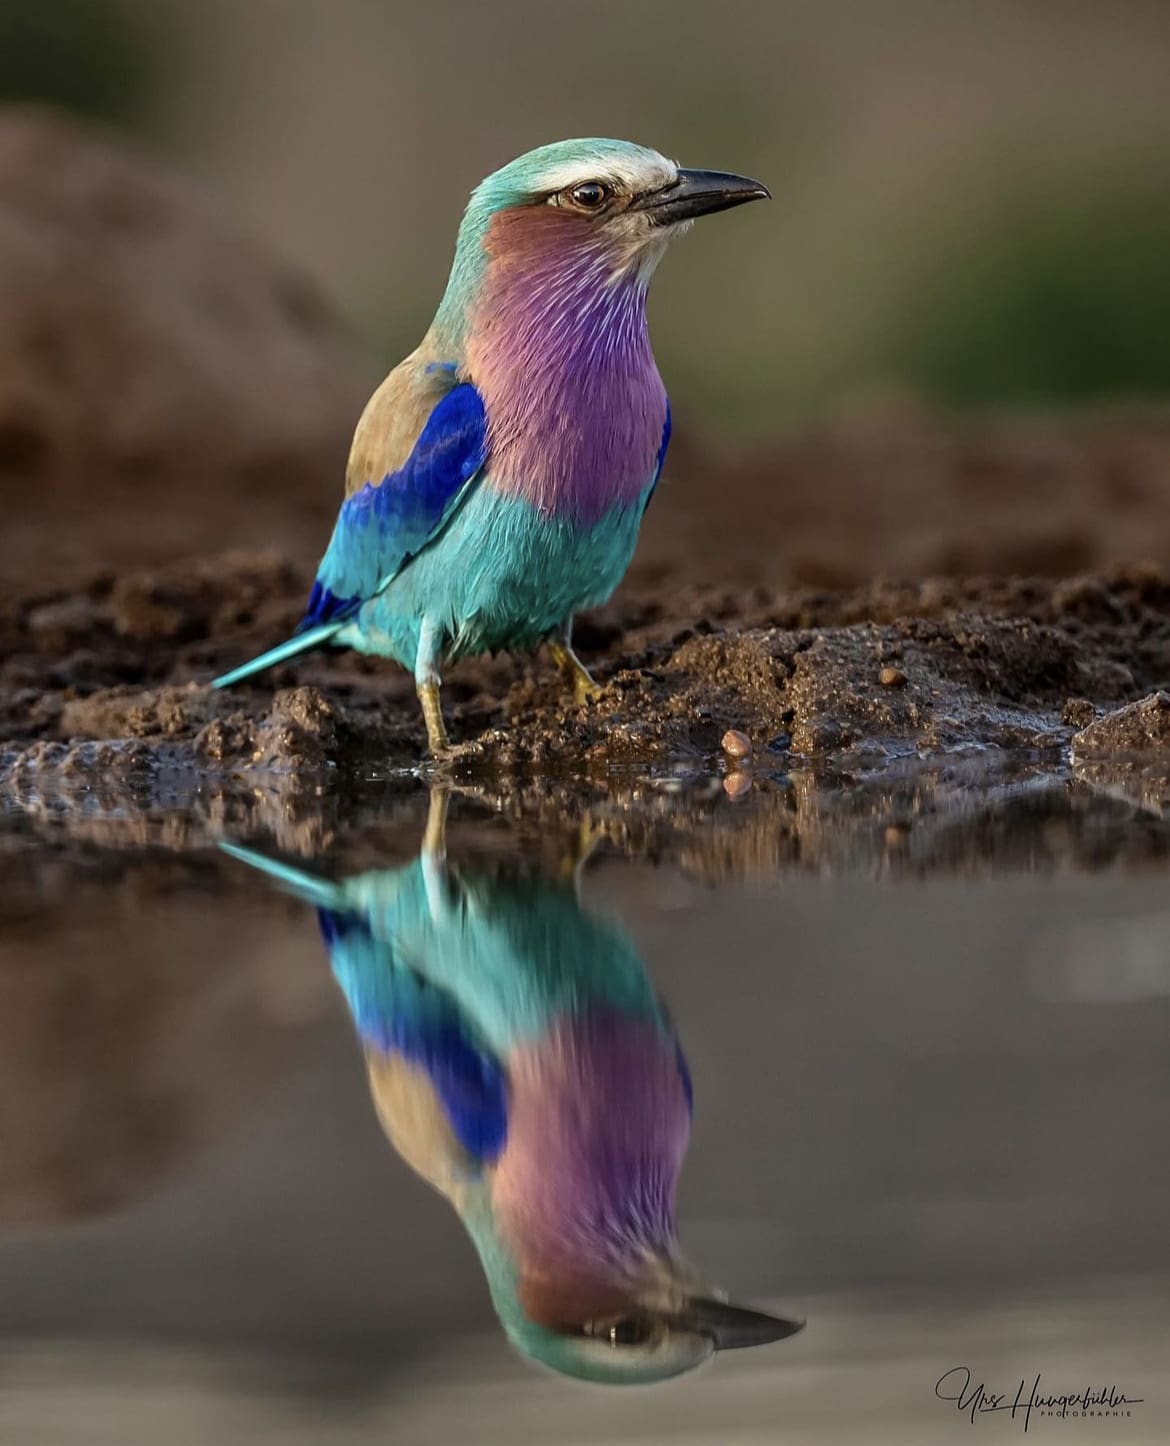 Lilac-breasted roller reflection off a puddle as it approaches to drink